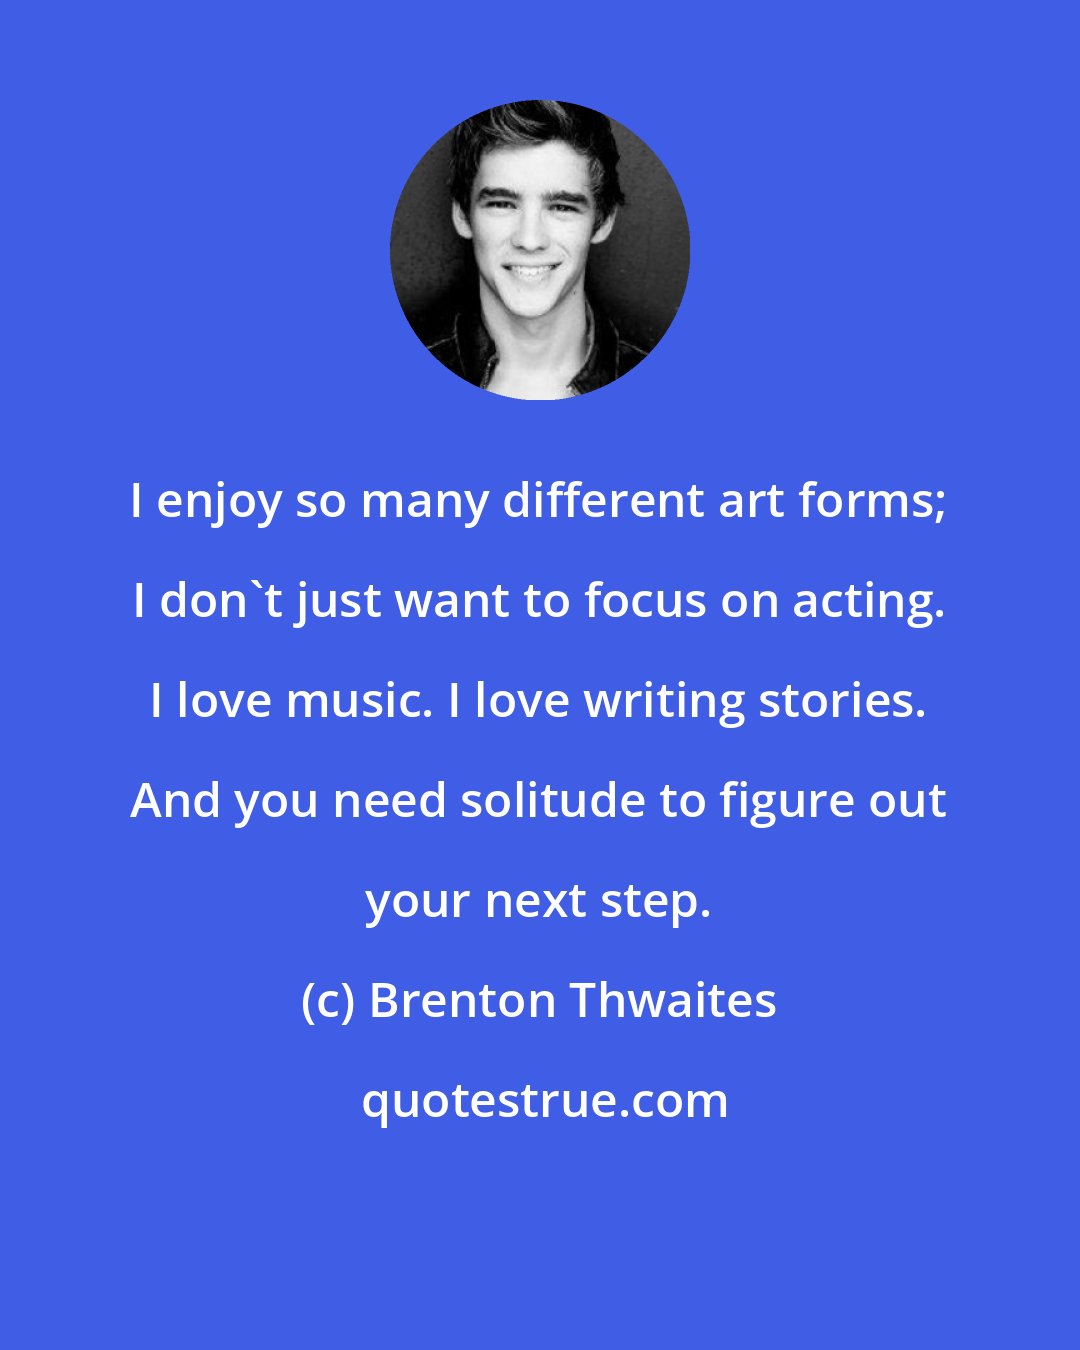 Brenton Thwaites: I enjoy so many different art forms; I don't just want to focus on acting. I love music. I love writing stories. And you need solitude to figure out your next step.